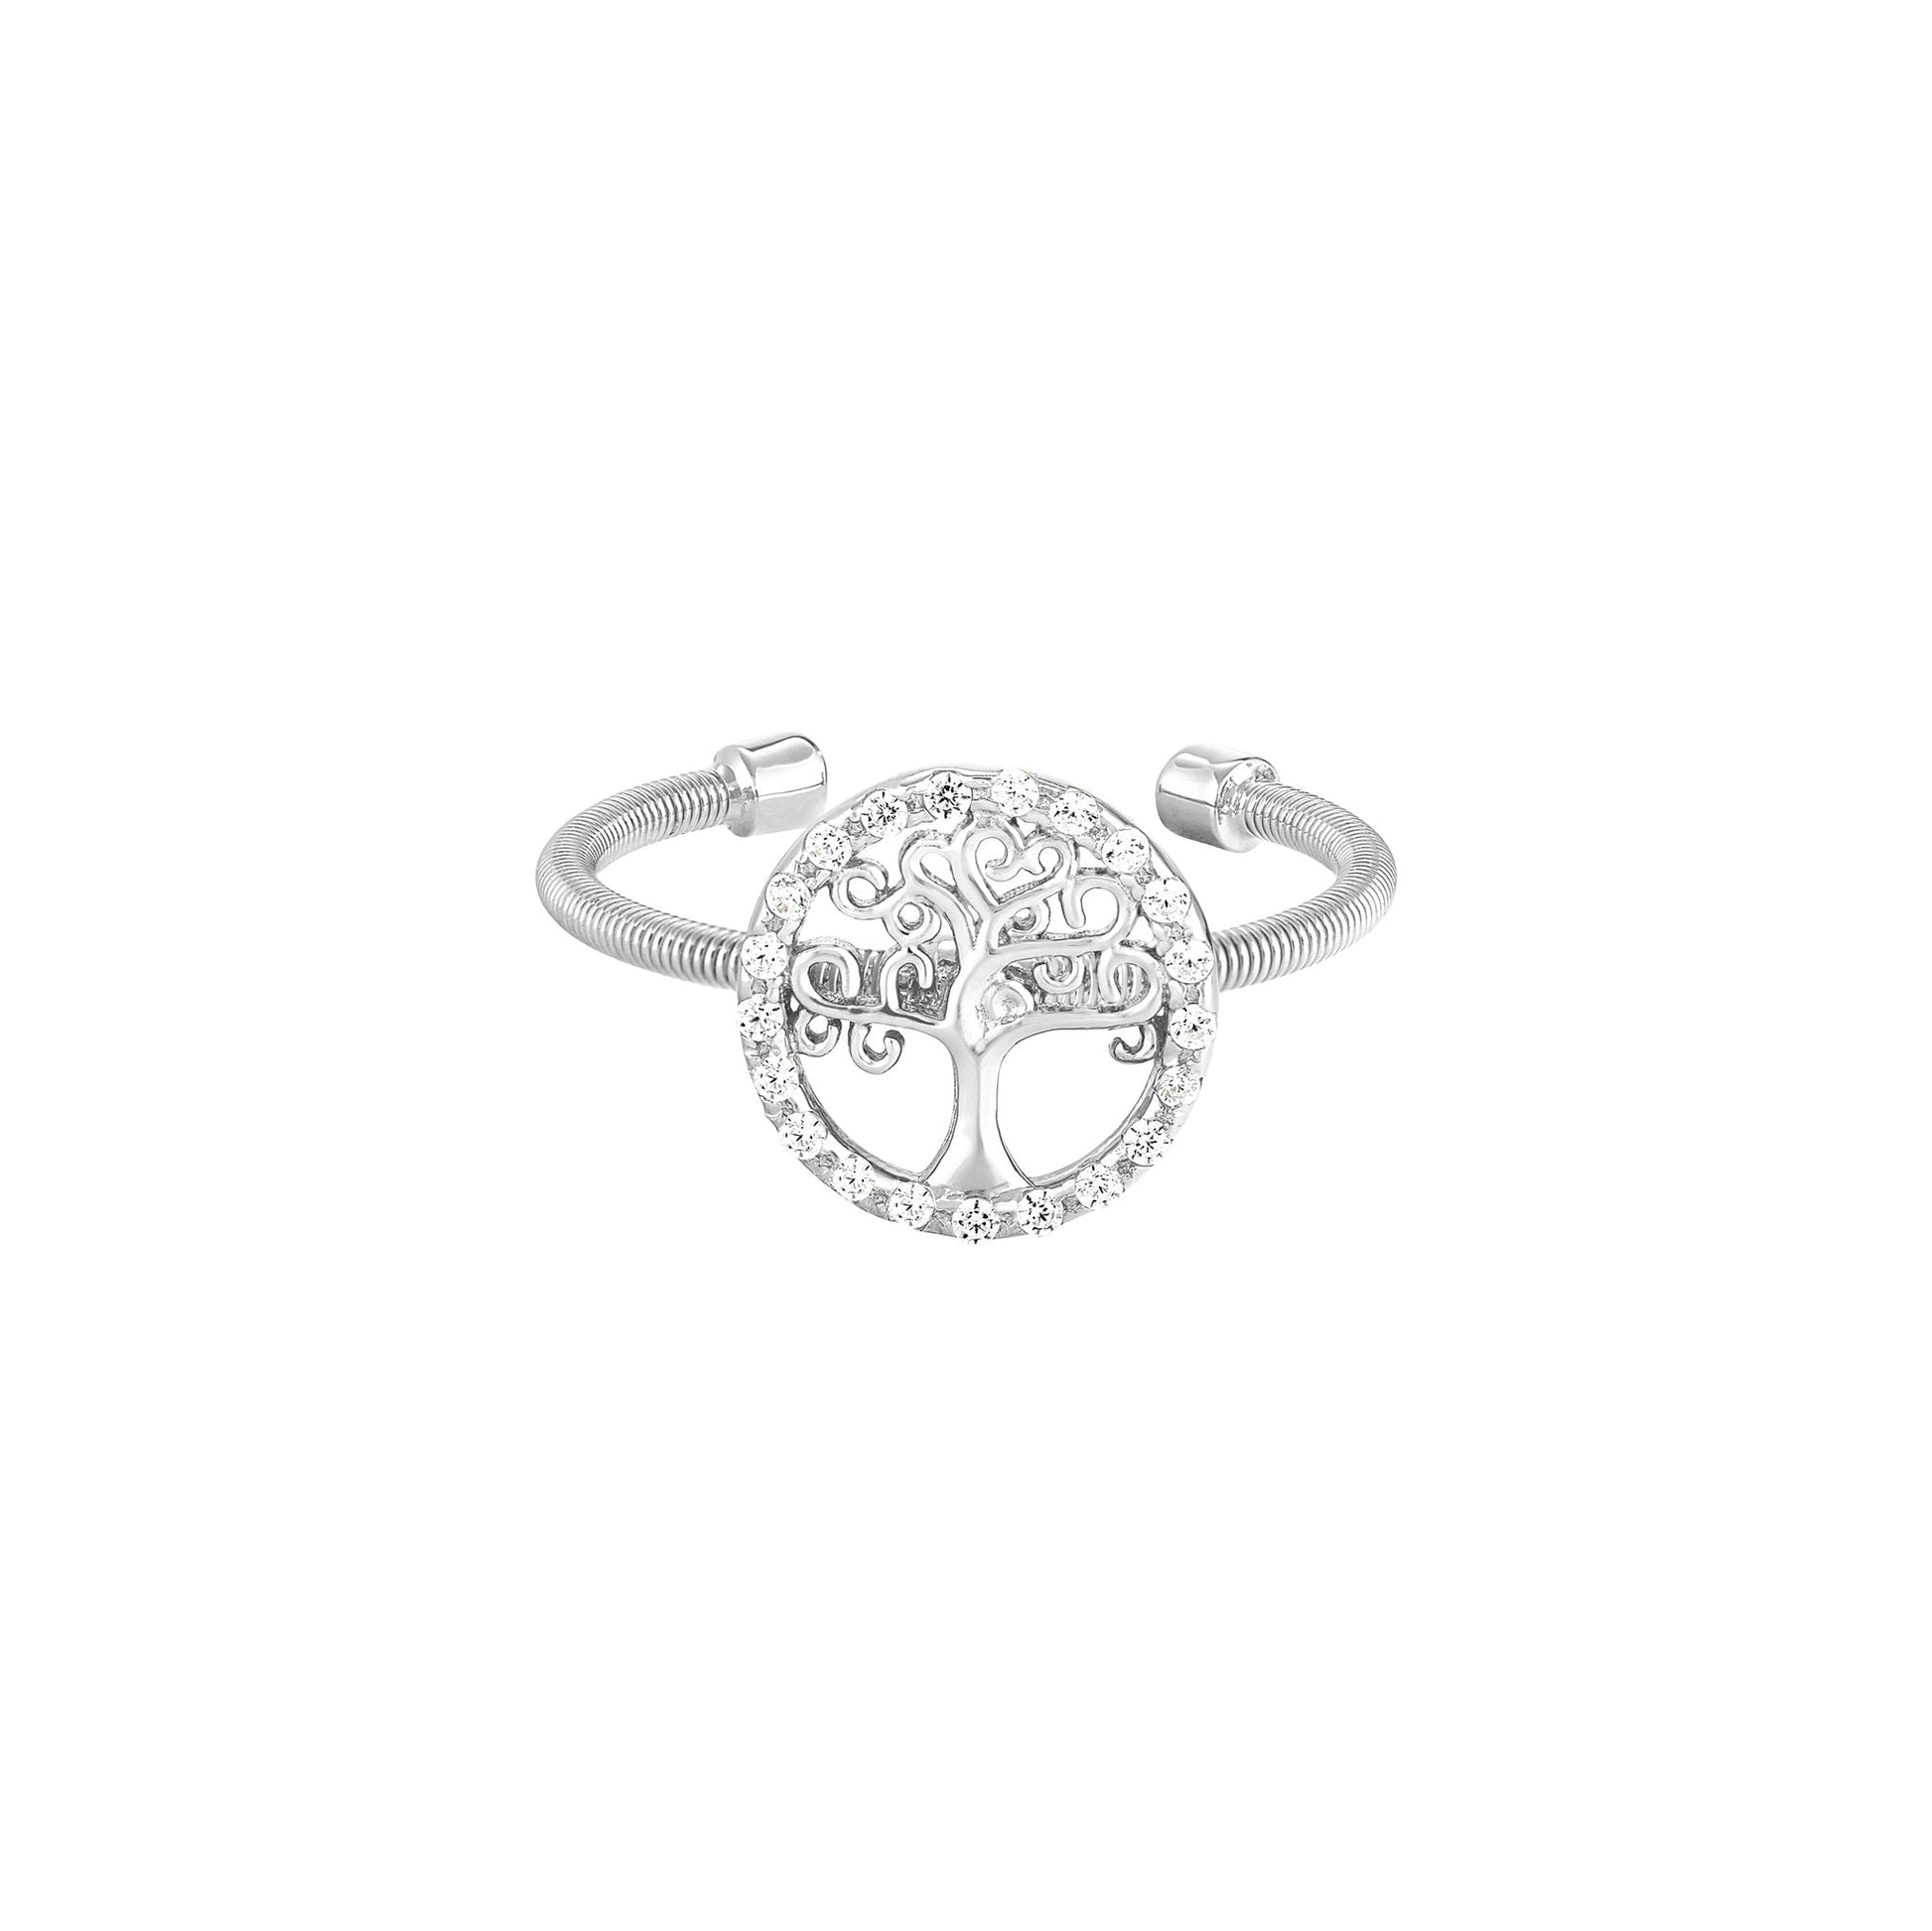 A cable tree ring with simulated diamonds displayed on a neutral white background.